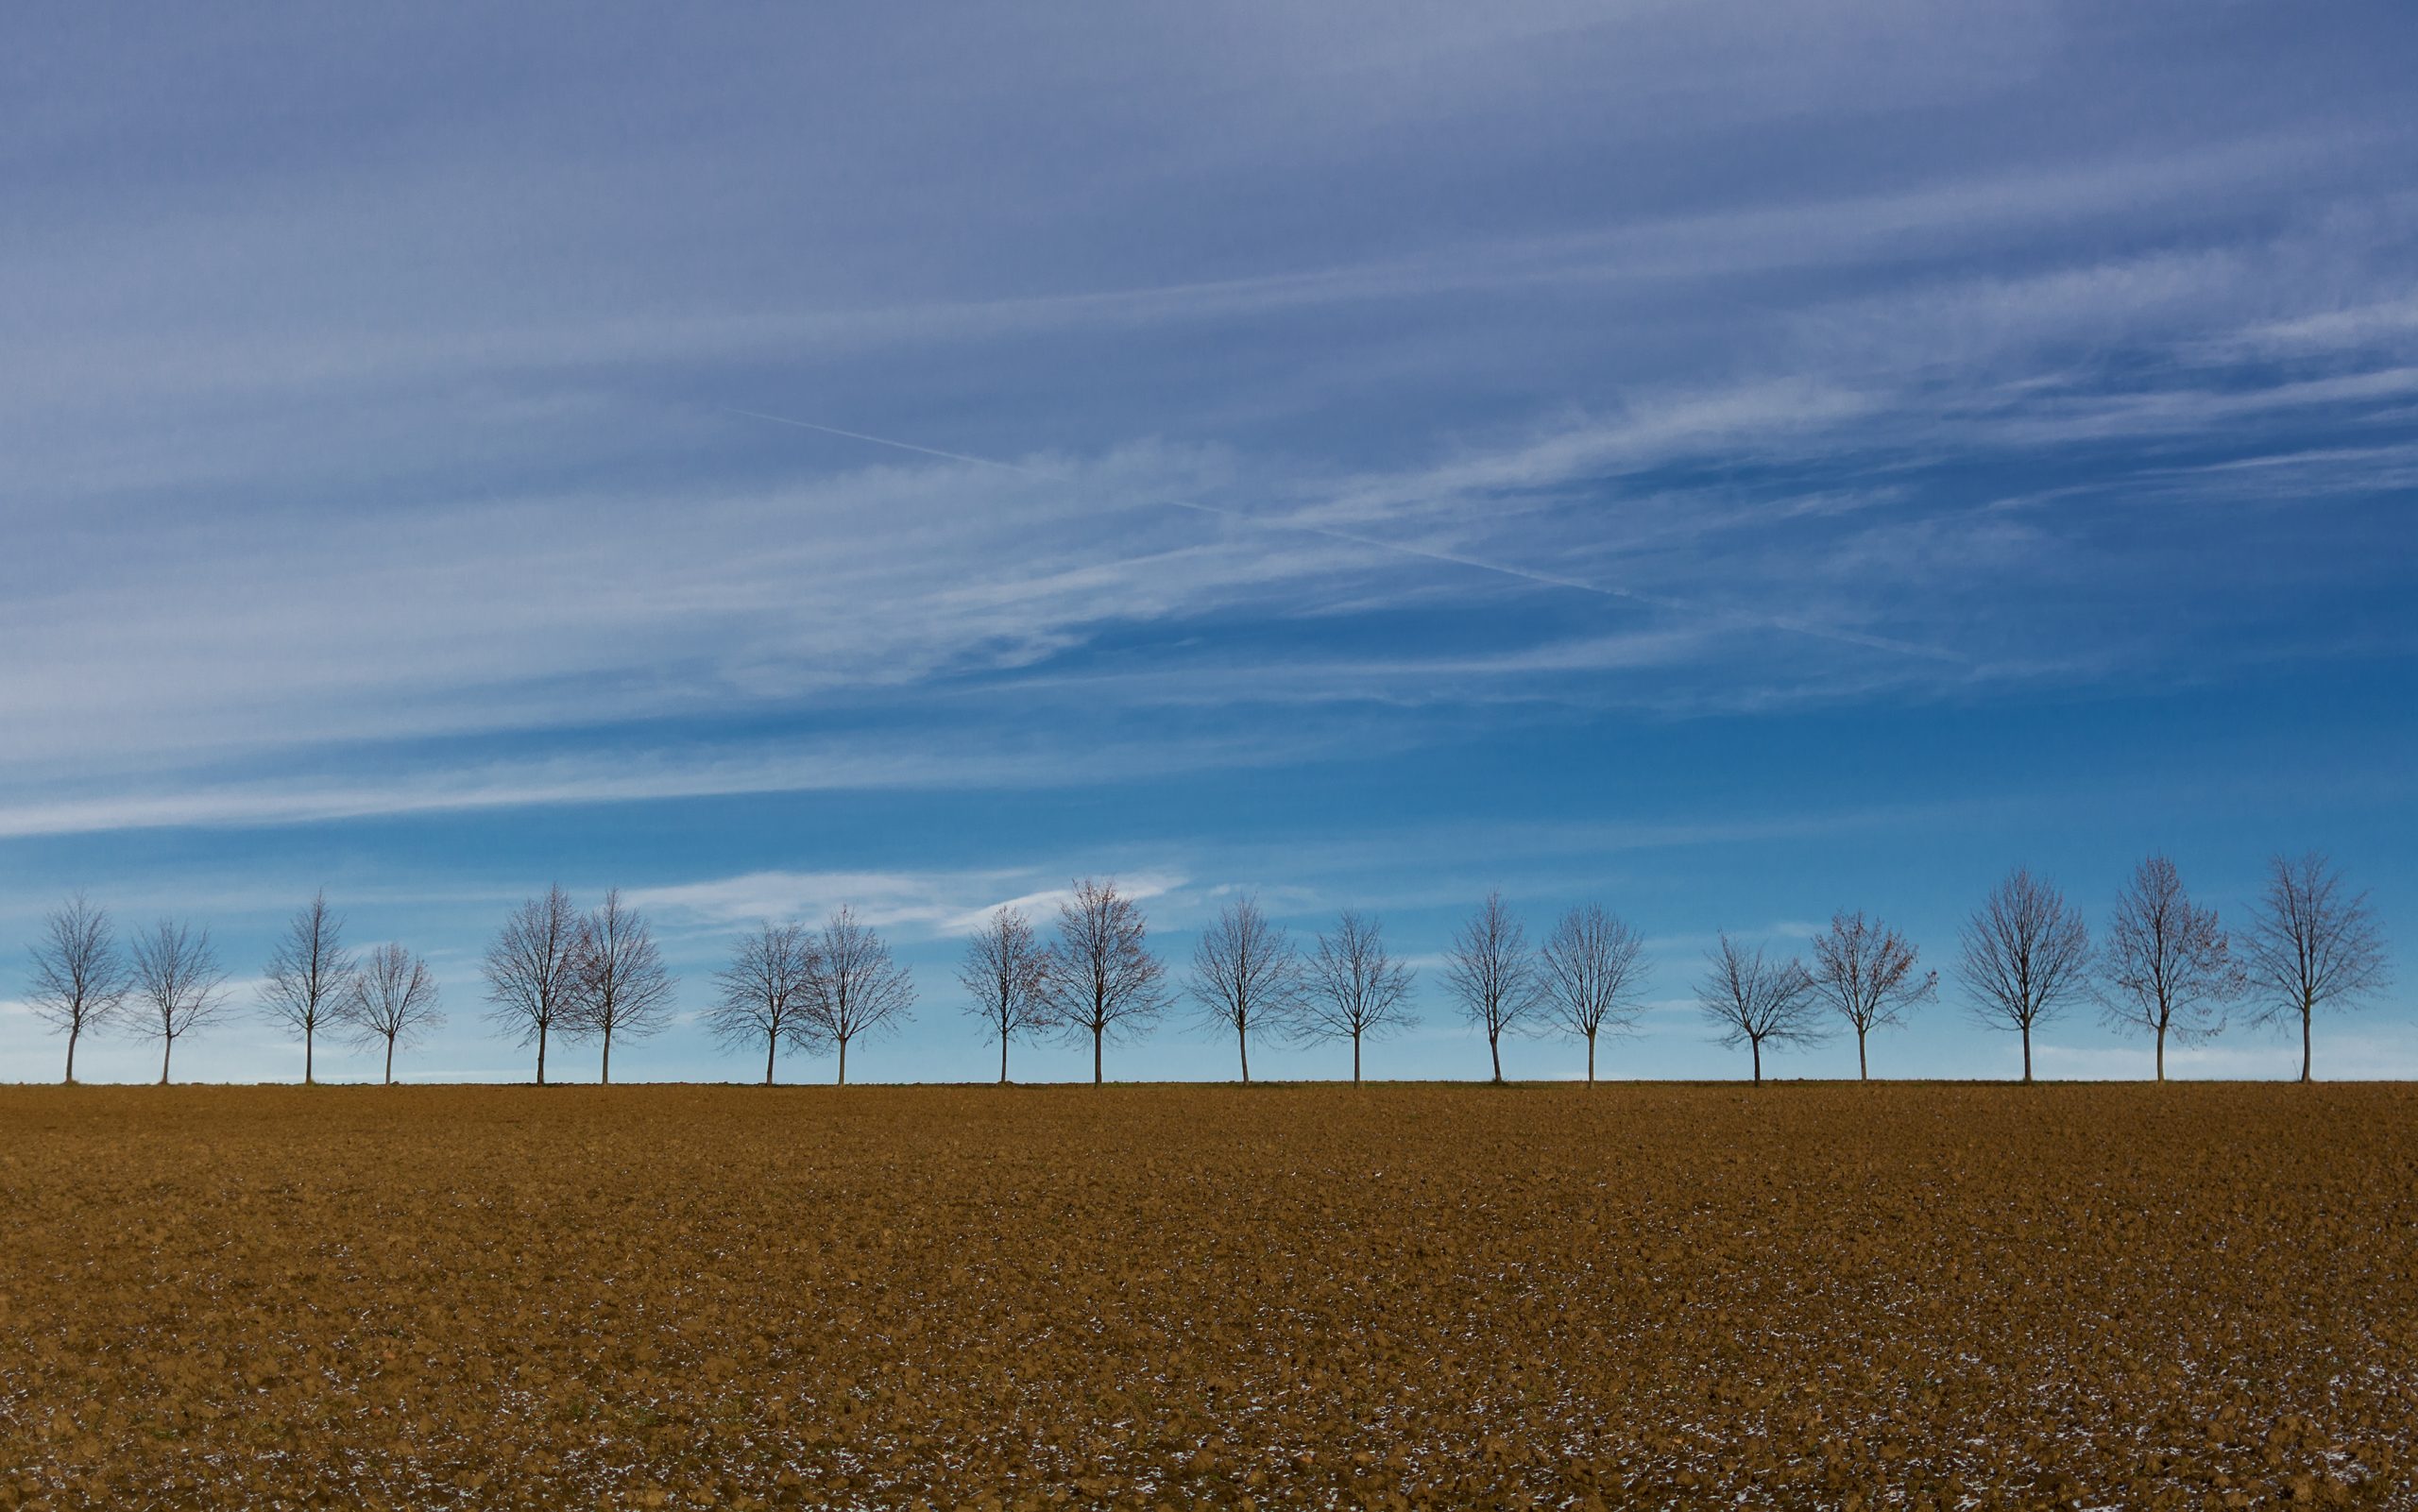 A row of trees on the far side of a field and blue sky behind them.